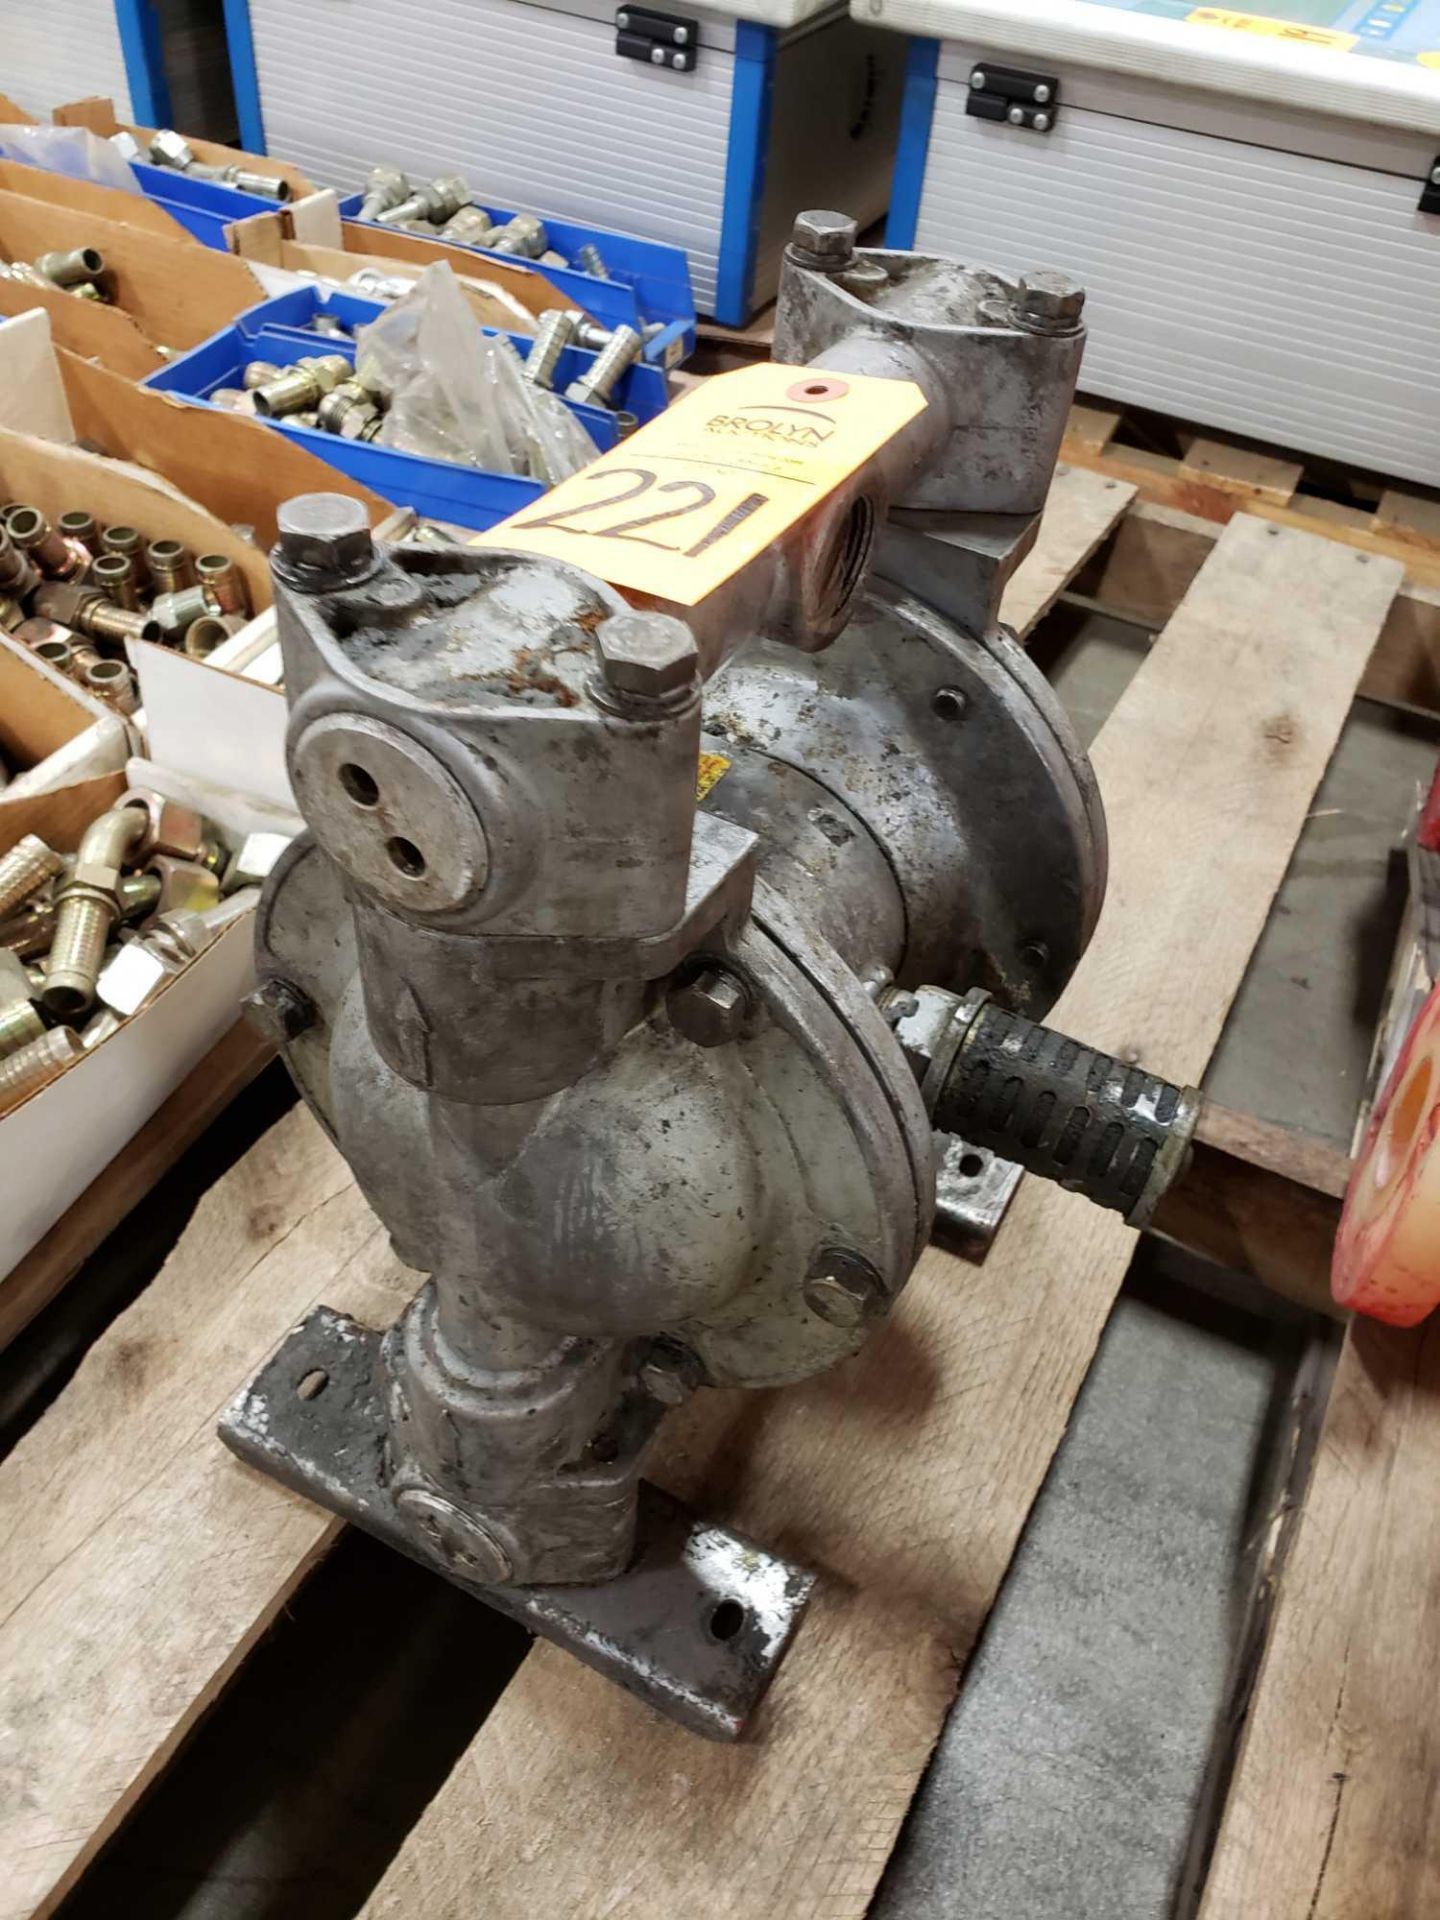 Diaphragm pump. Appears to be ARO or Ingersoll Rand.